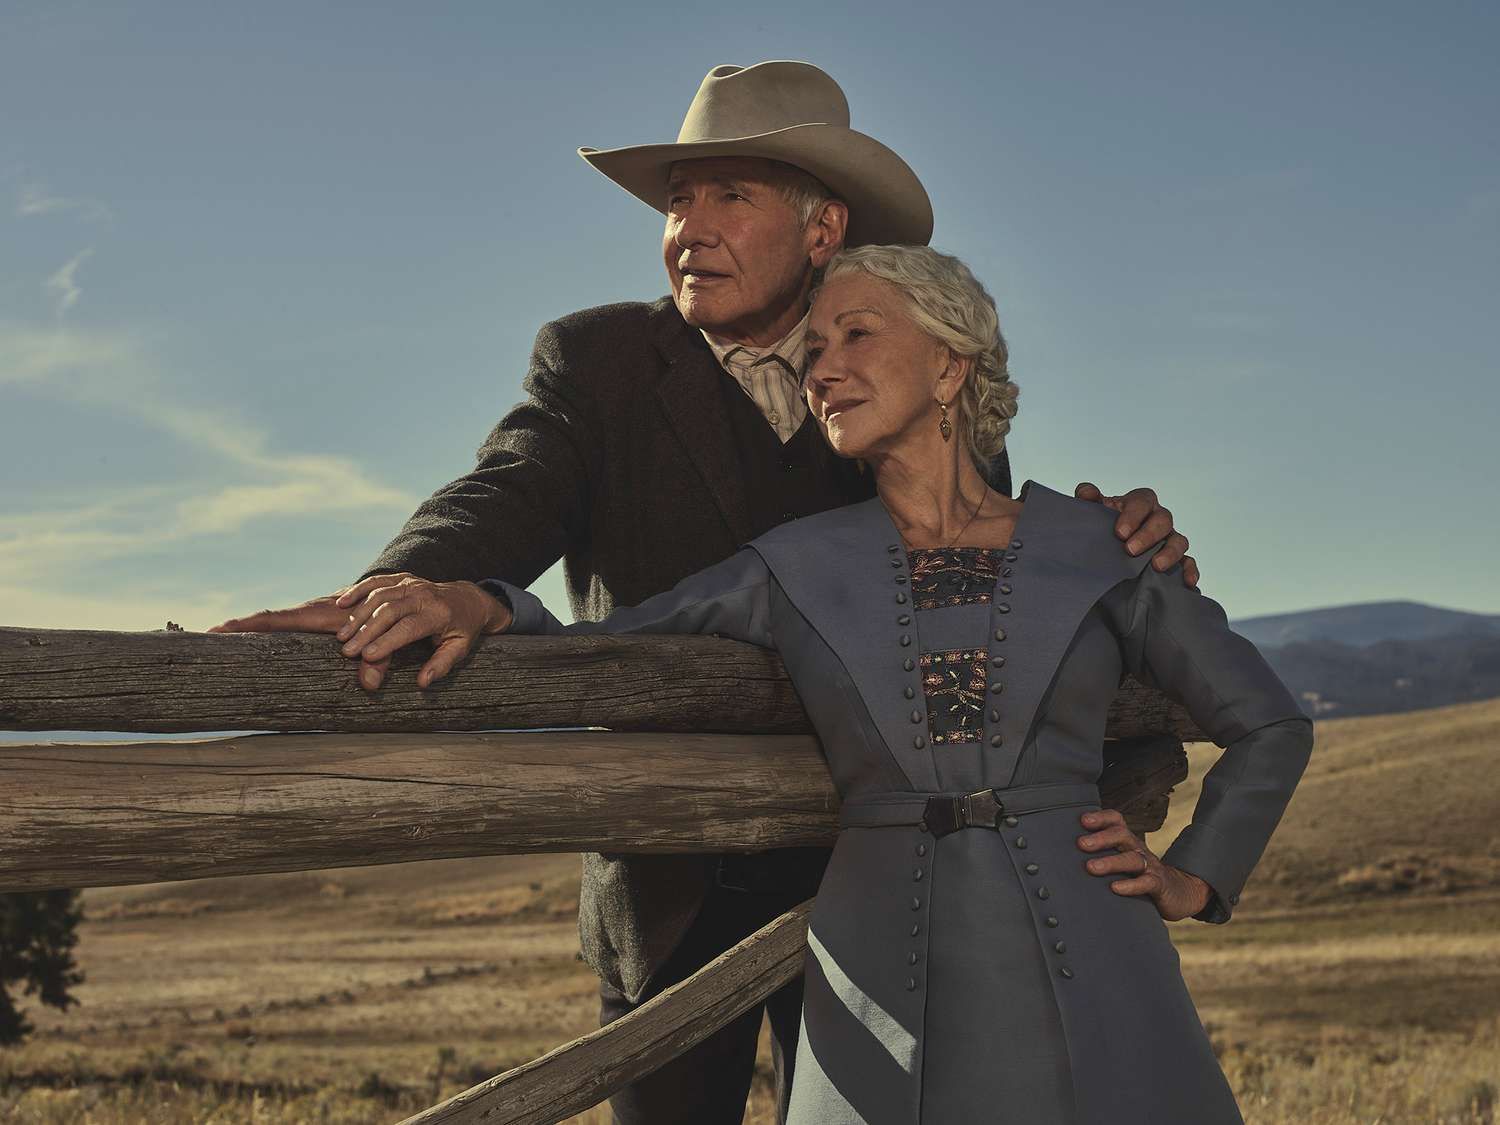 Exciting Peek into 'Yellowstone 1923': What's Next for the Duttons in Season 2?